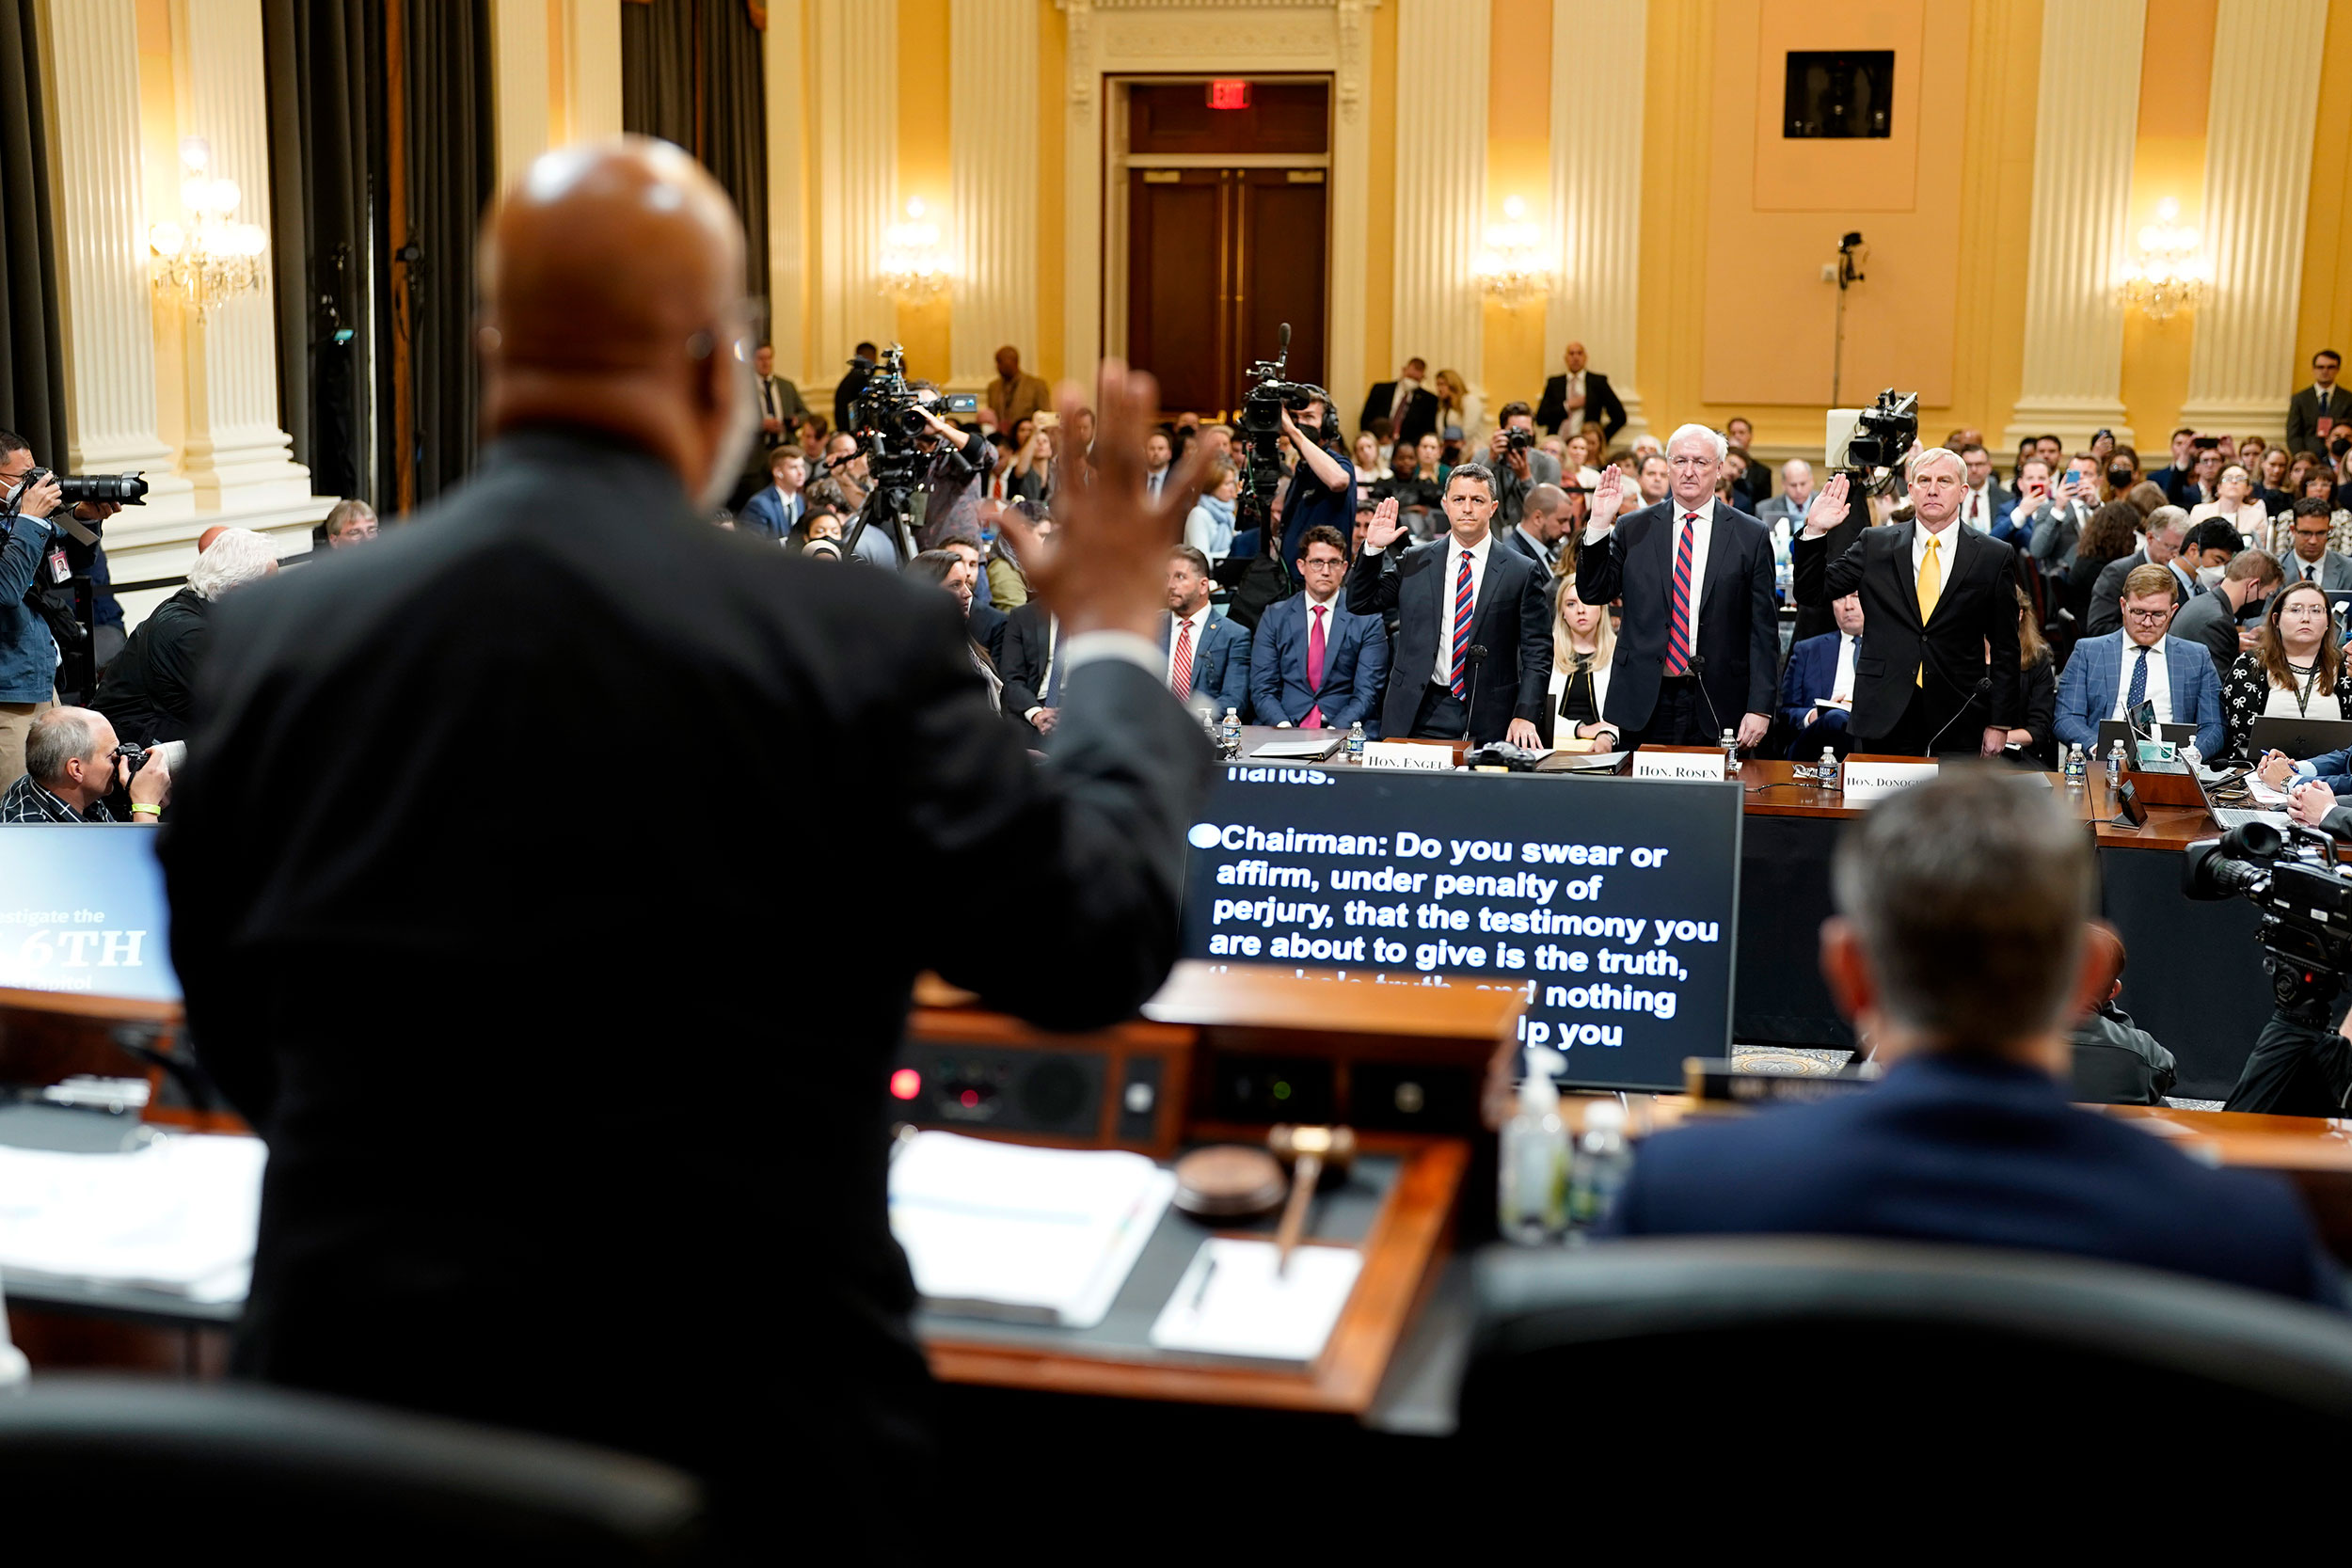 Rep. Bennie Thompson swears in Steven Engel, Jeffrey A. Rosen, and Richard Donoghue during the hearing on June 23.